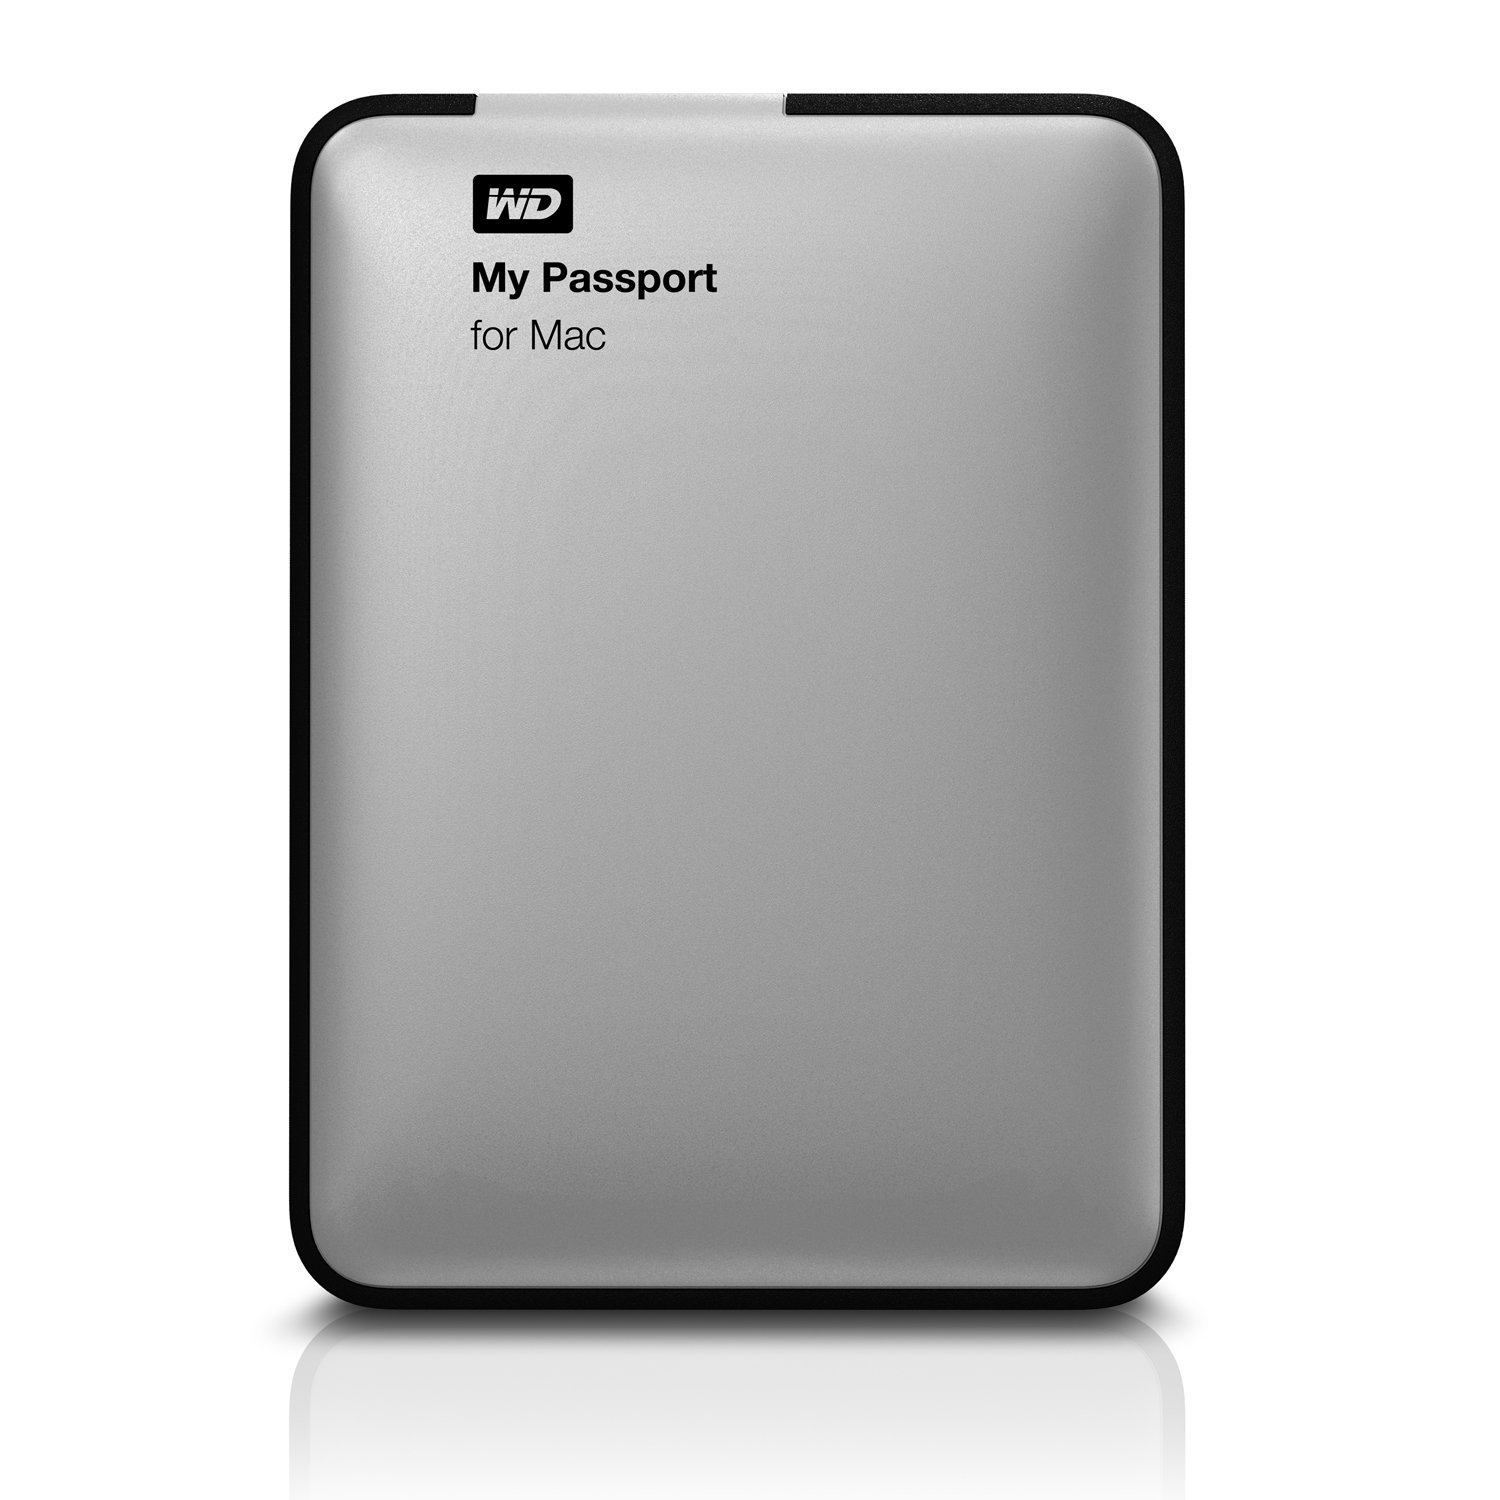 my passport for mac use for pc